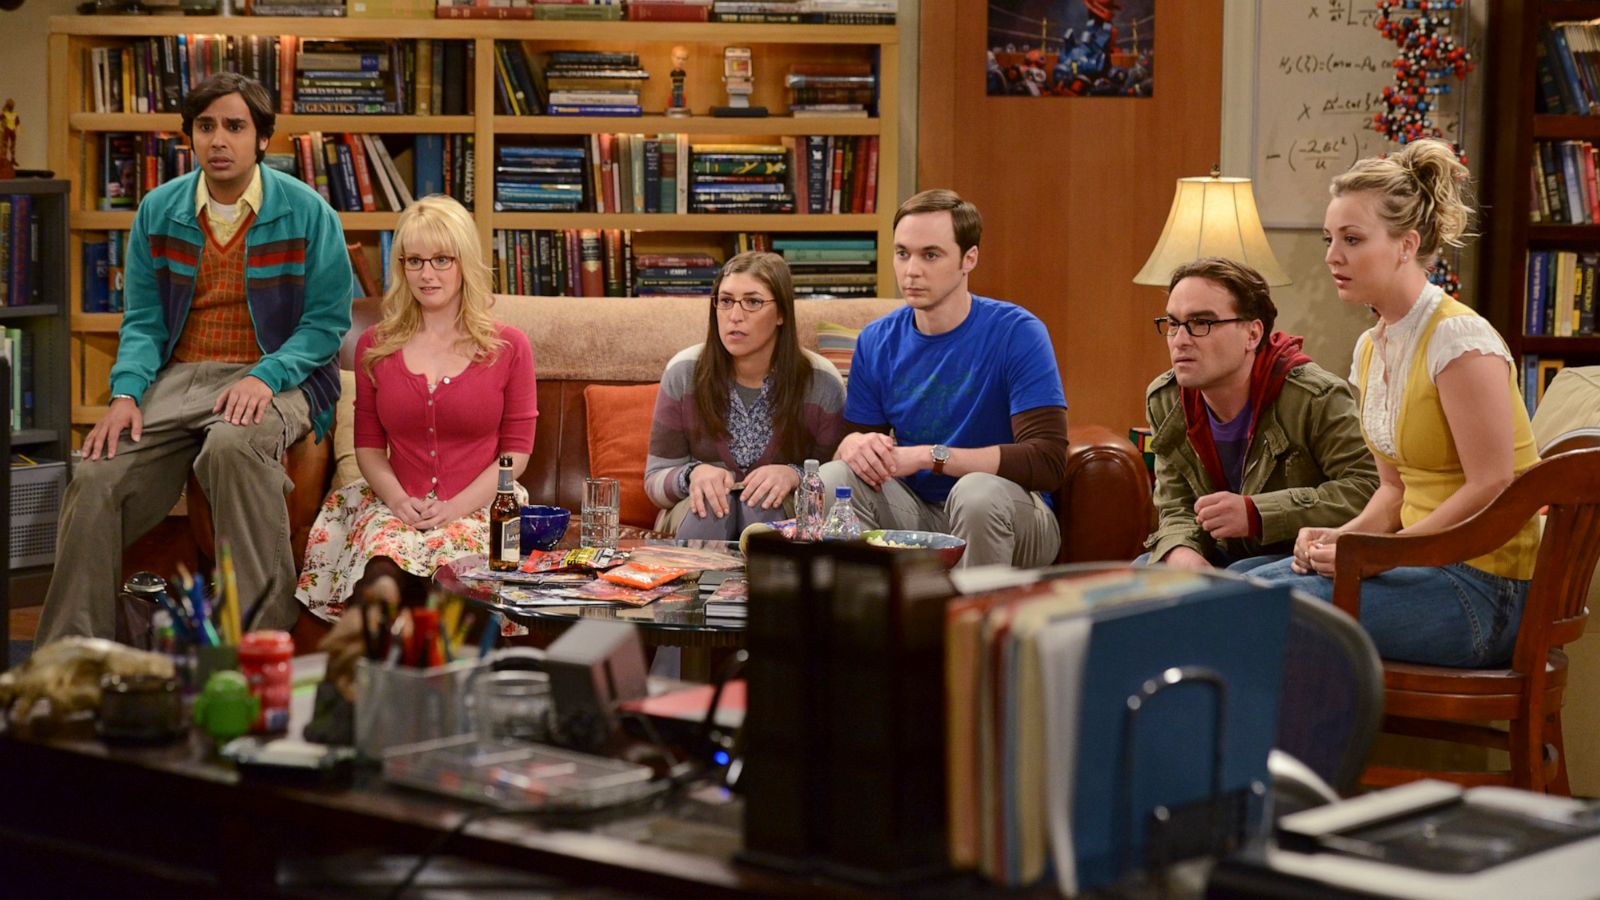 New 'Big Bang Theory' spinoff in development - ABC News